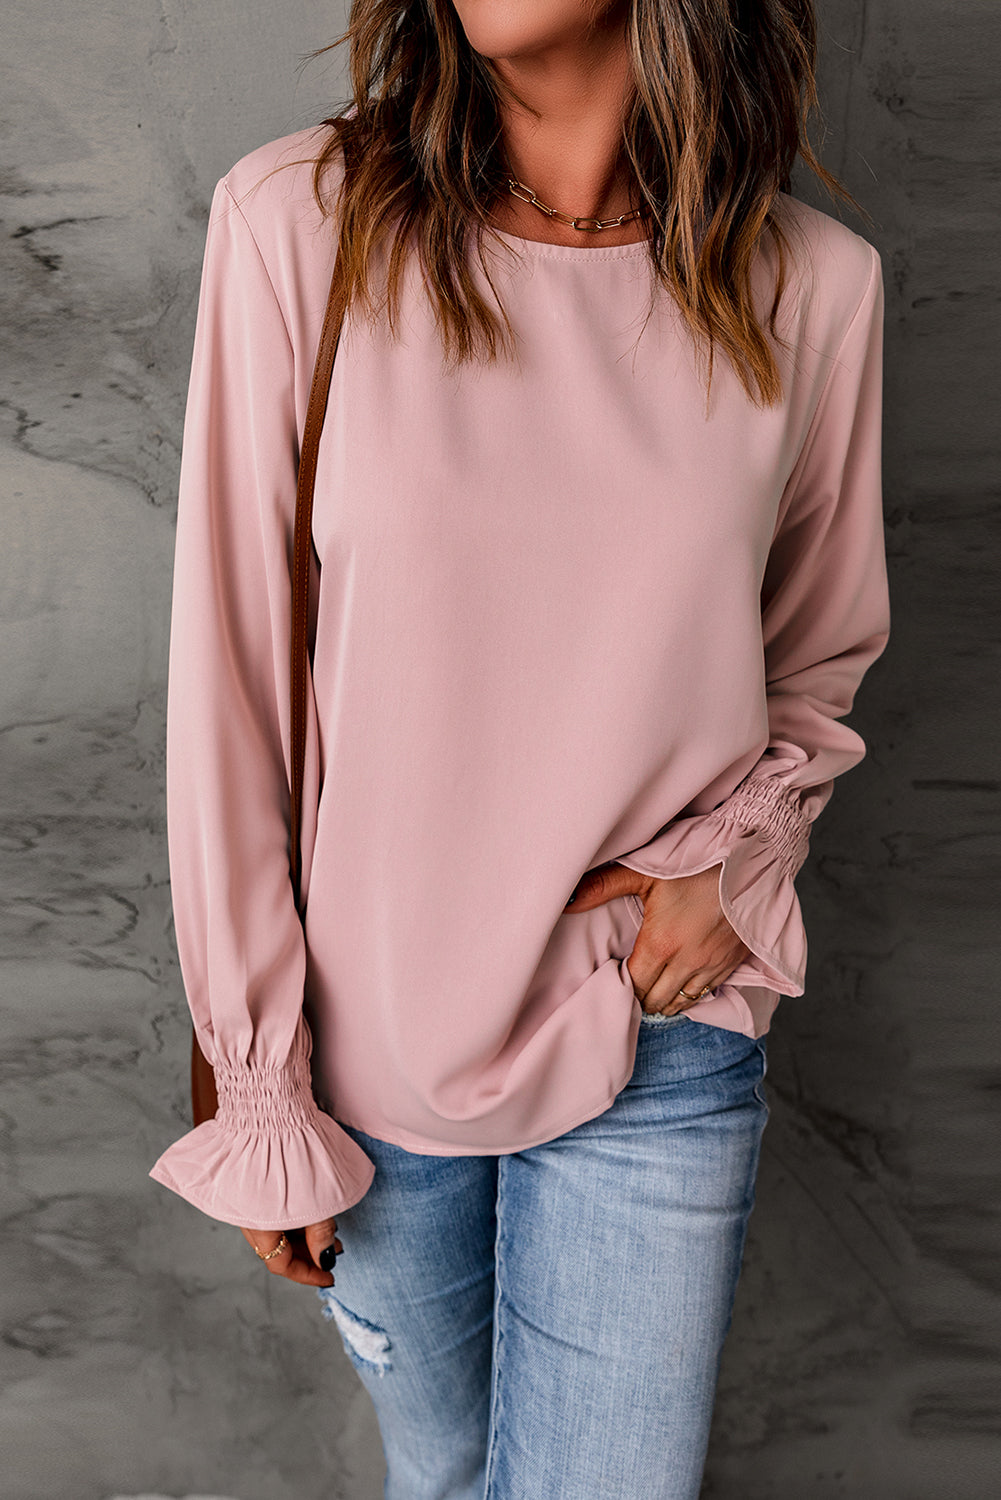 Pink Crew Neck Ruffle Bubble Sleeve Blouse Top